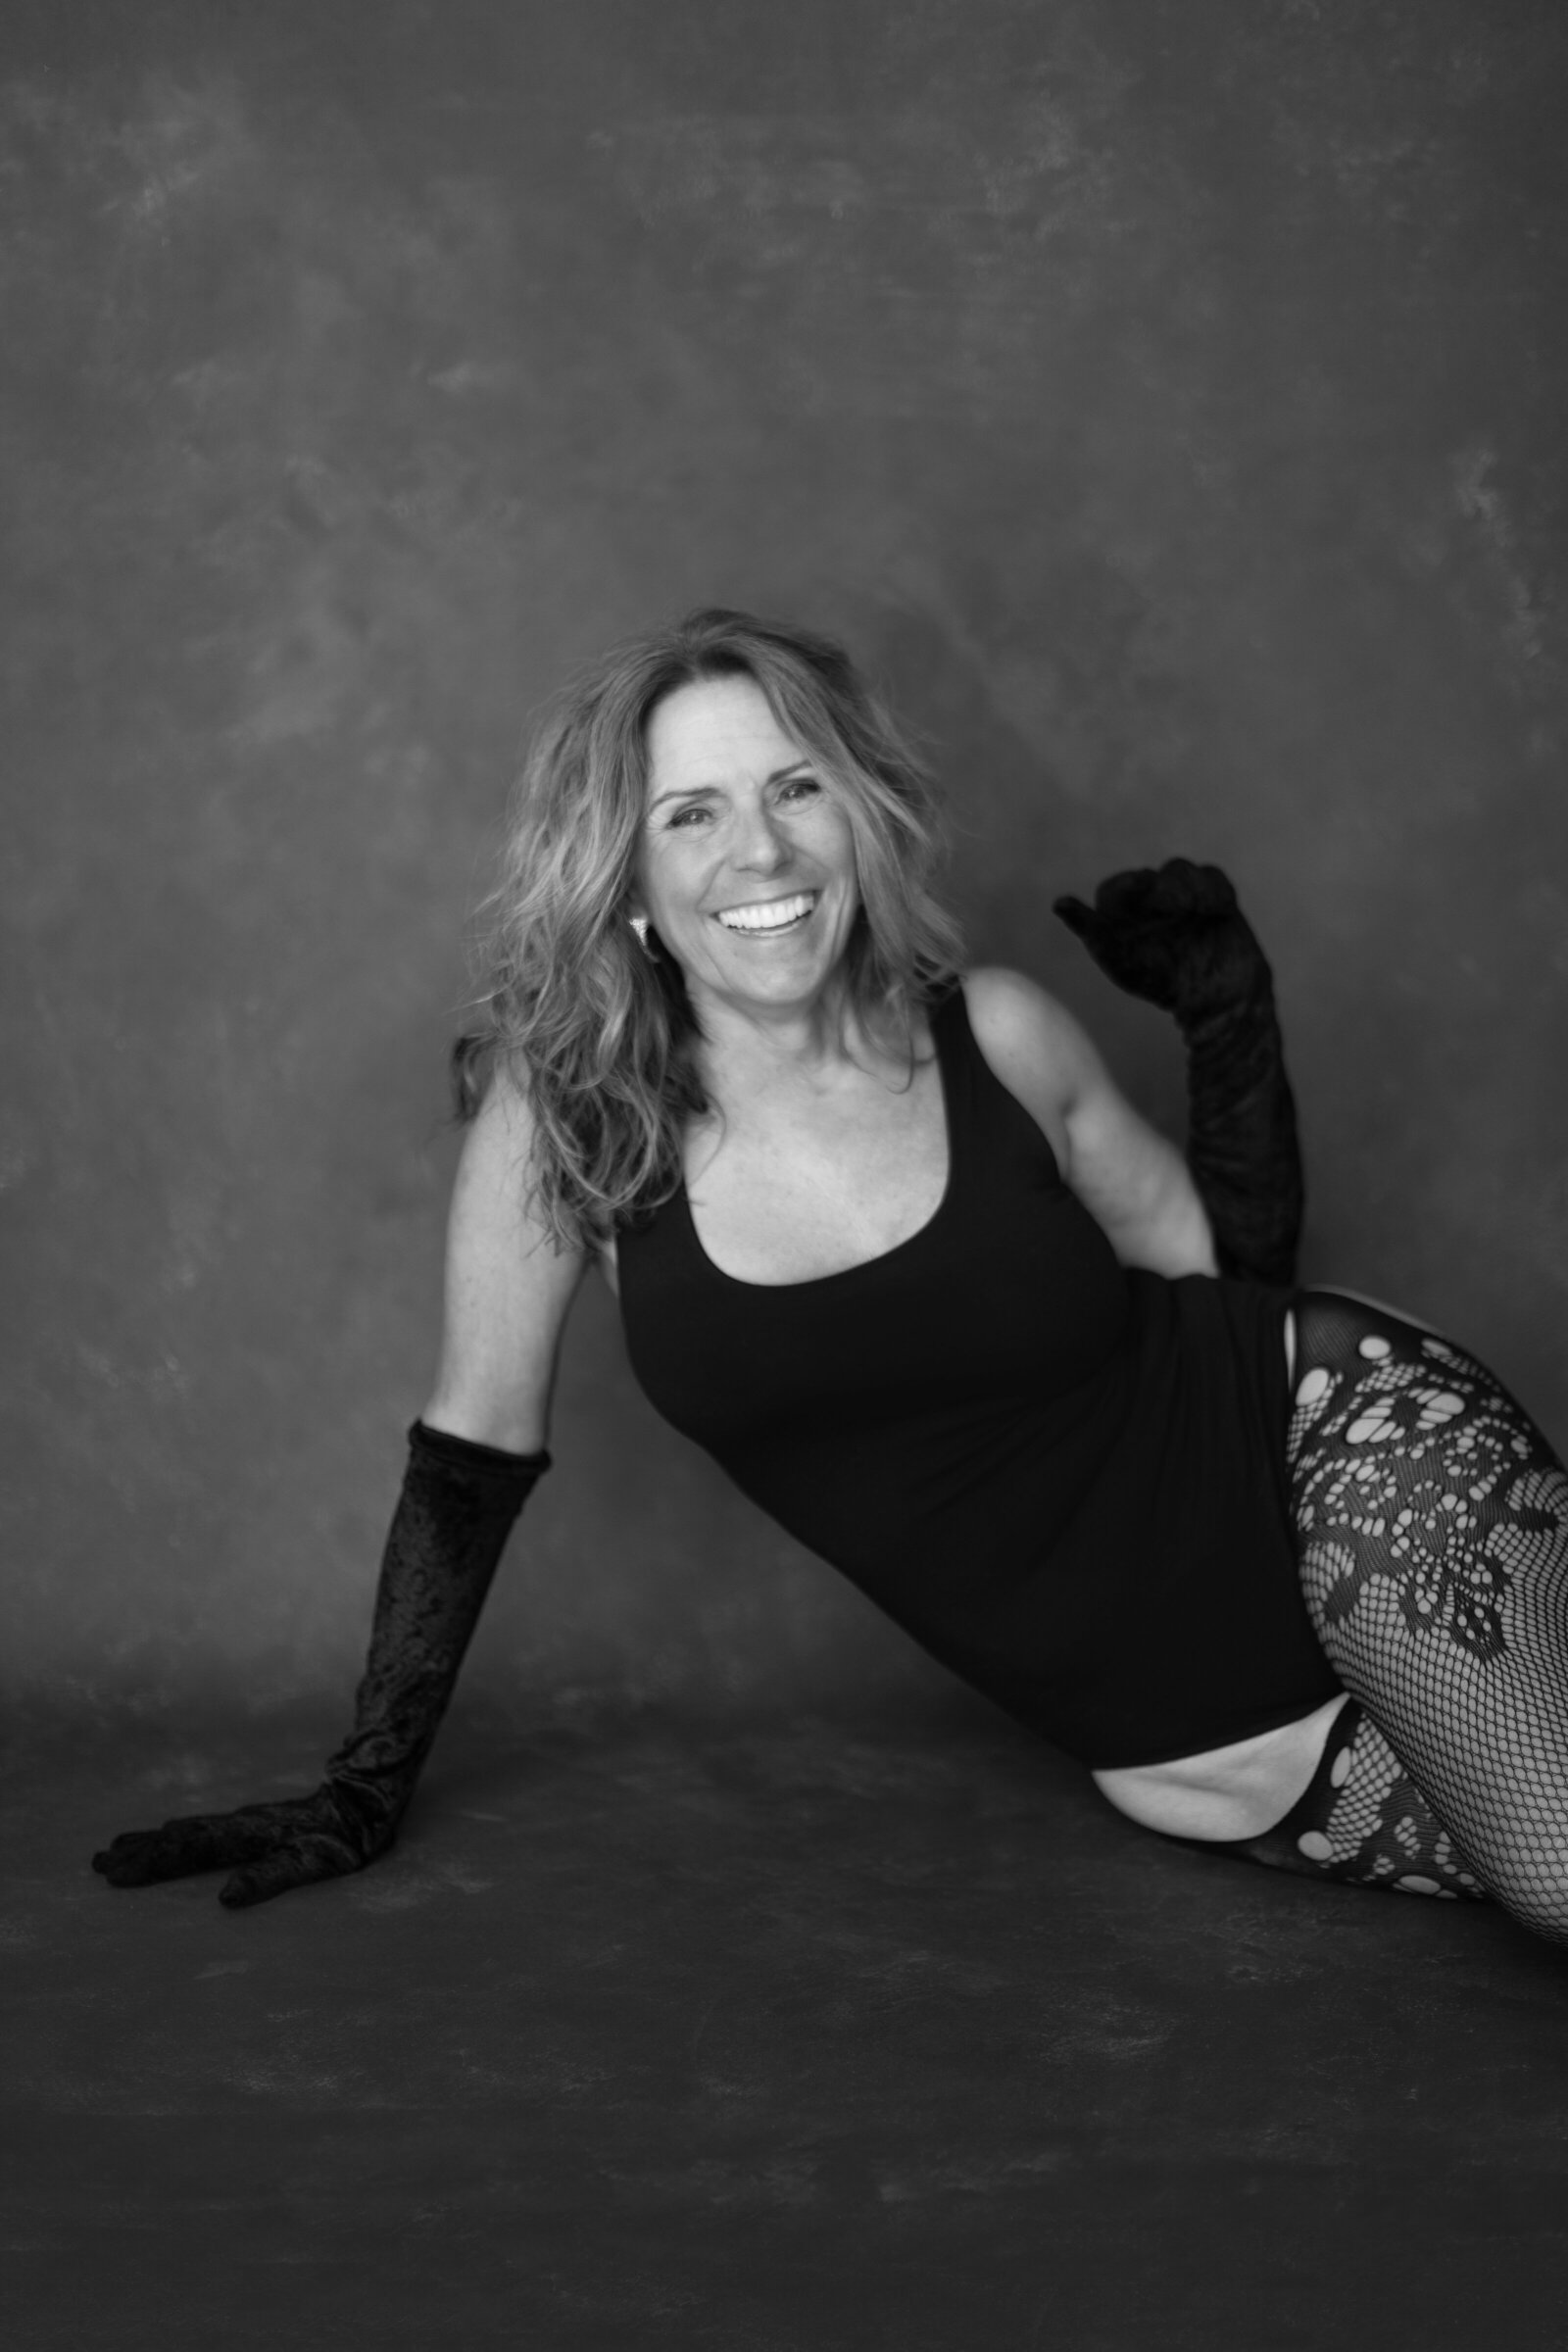 San Diego Boudoir Photographer - black and white inclusive photography